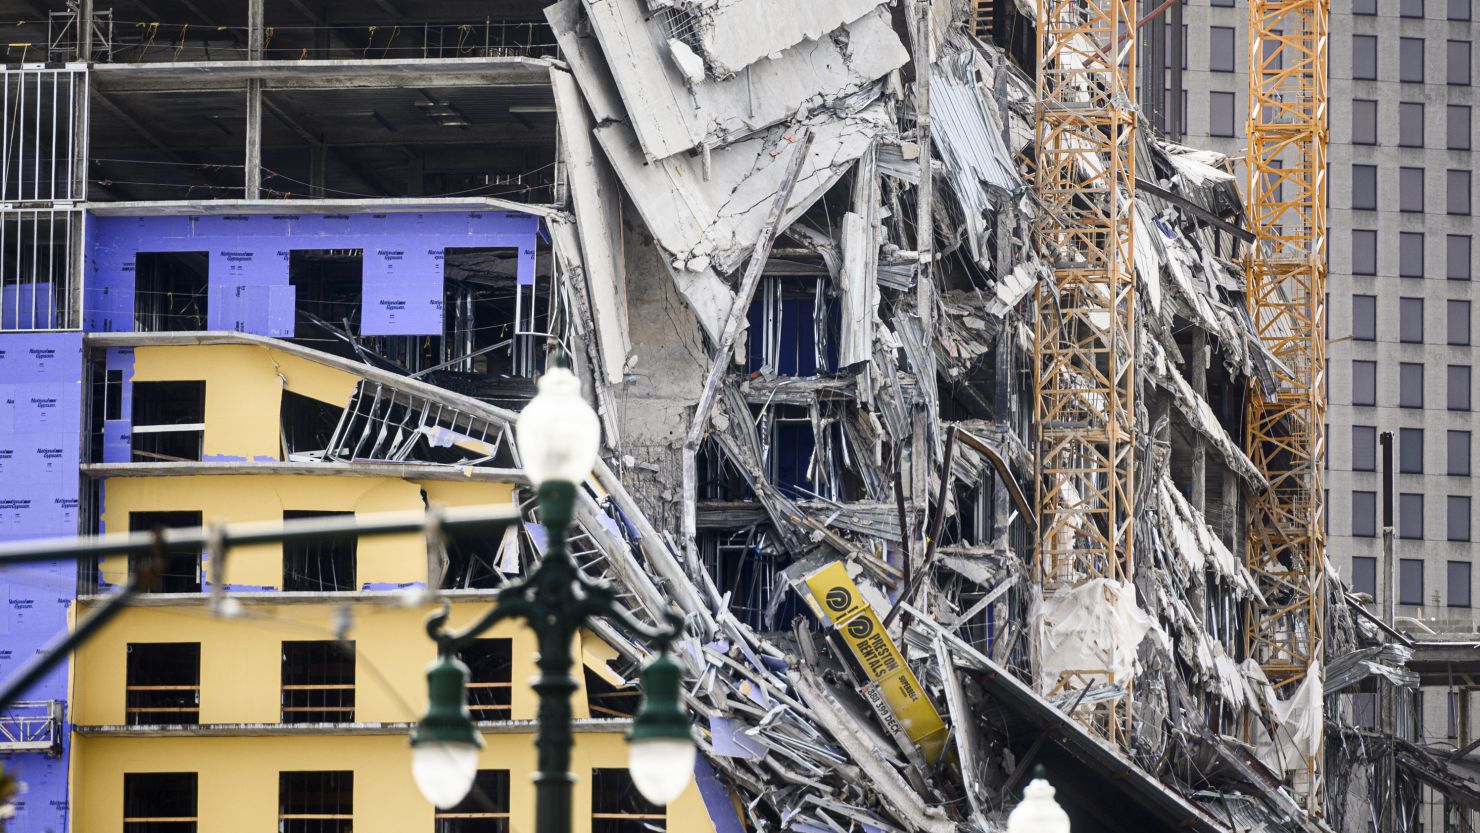 The Hard Rock Hotel partially collapsed in downtown New Orleans on October 12, 2019. 